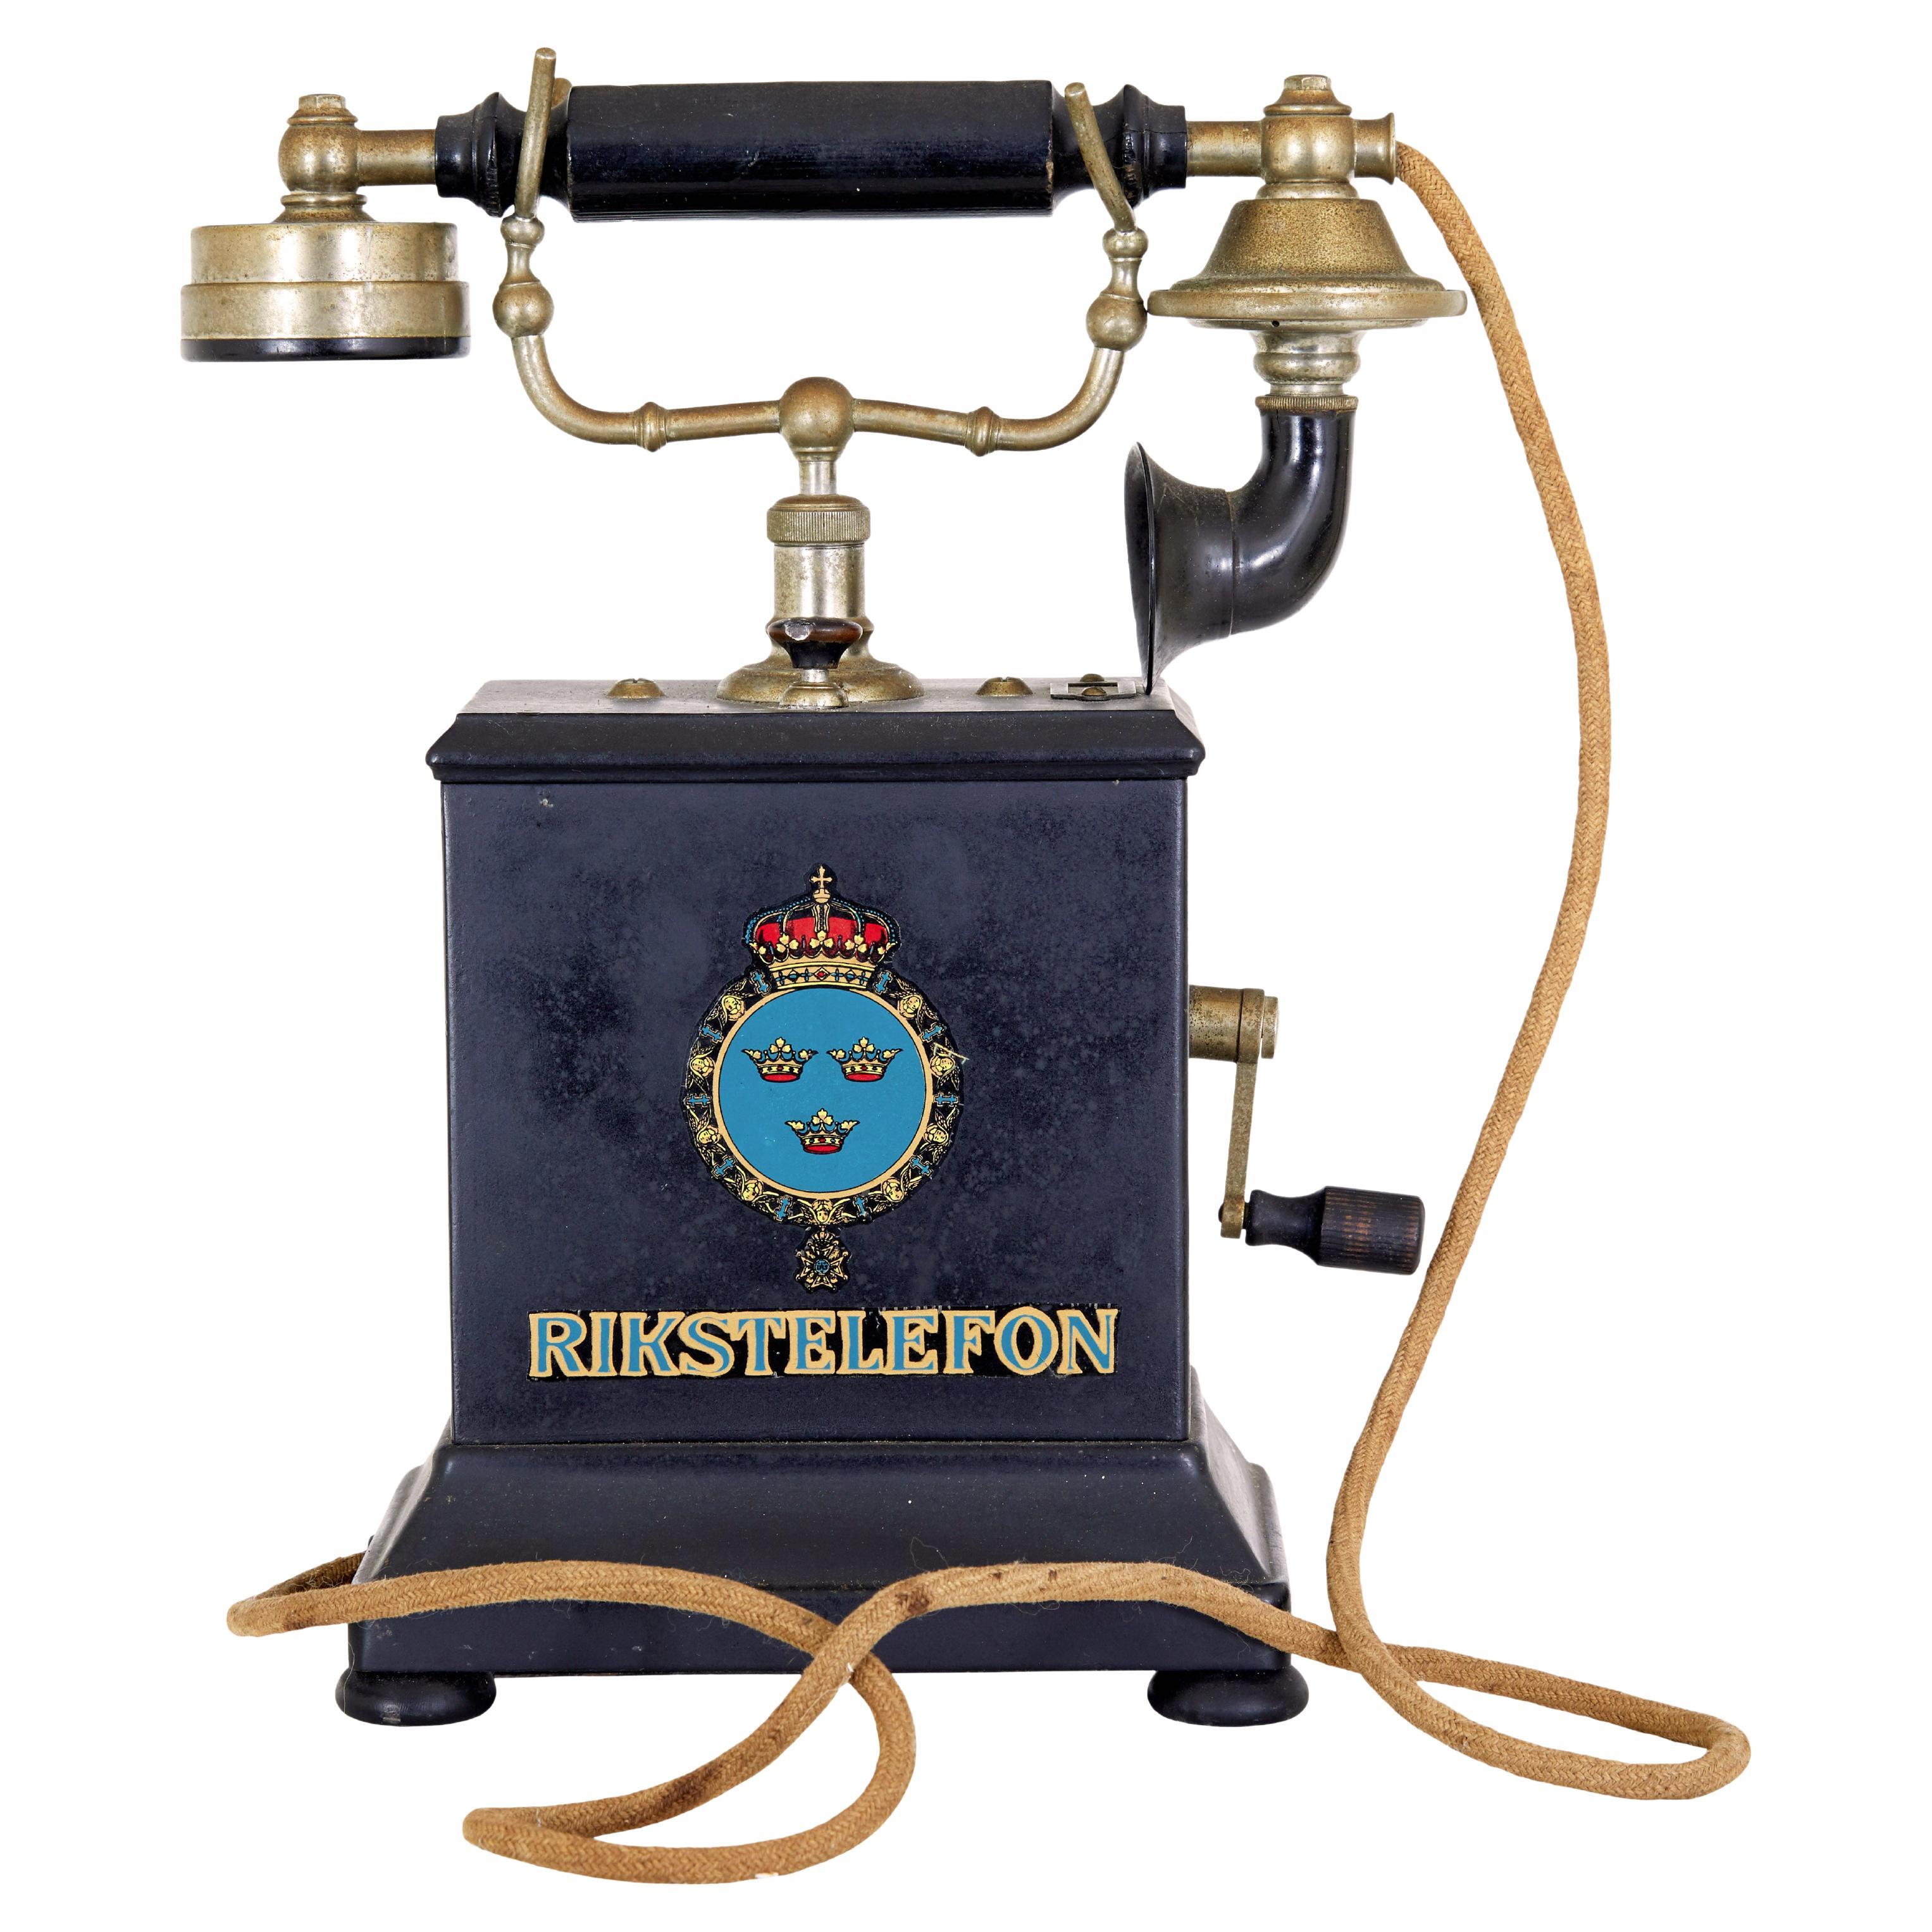 Early 20th century swedish metal telephone by Rikstelefon For Sale